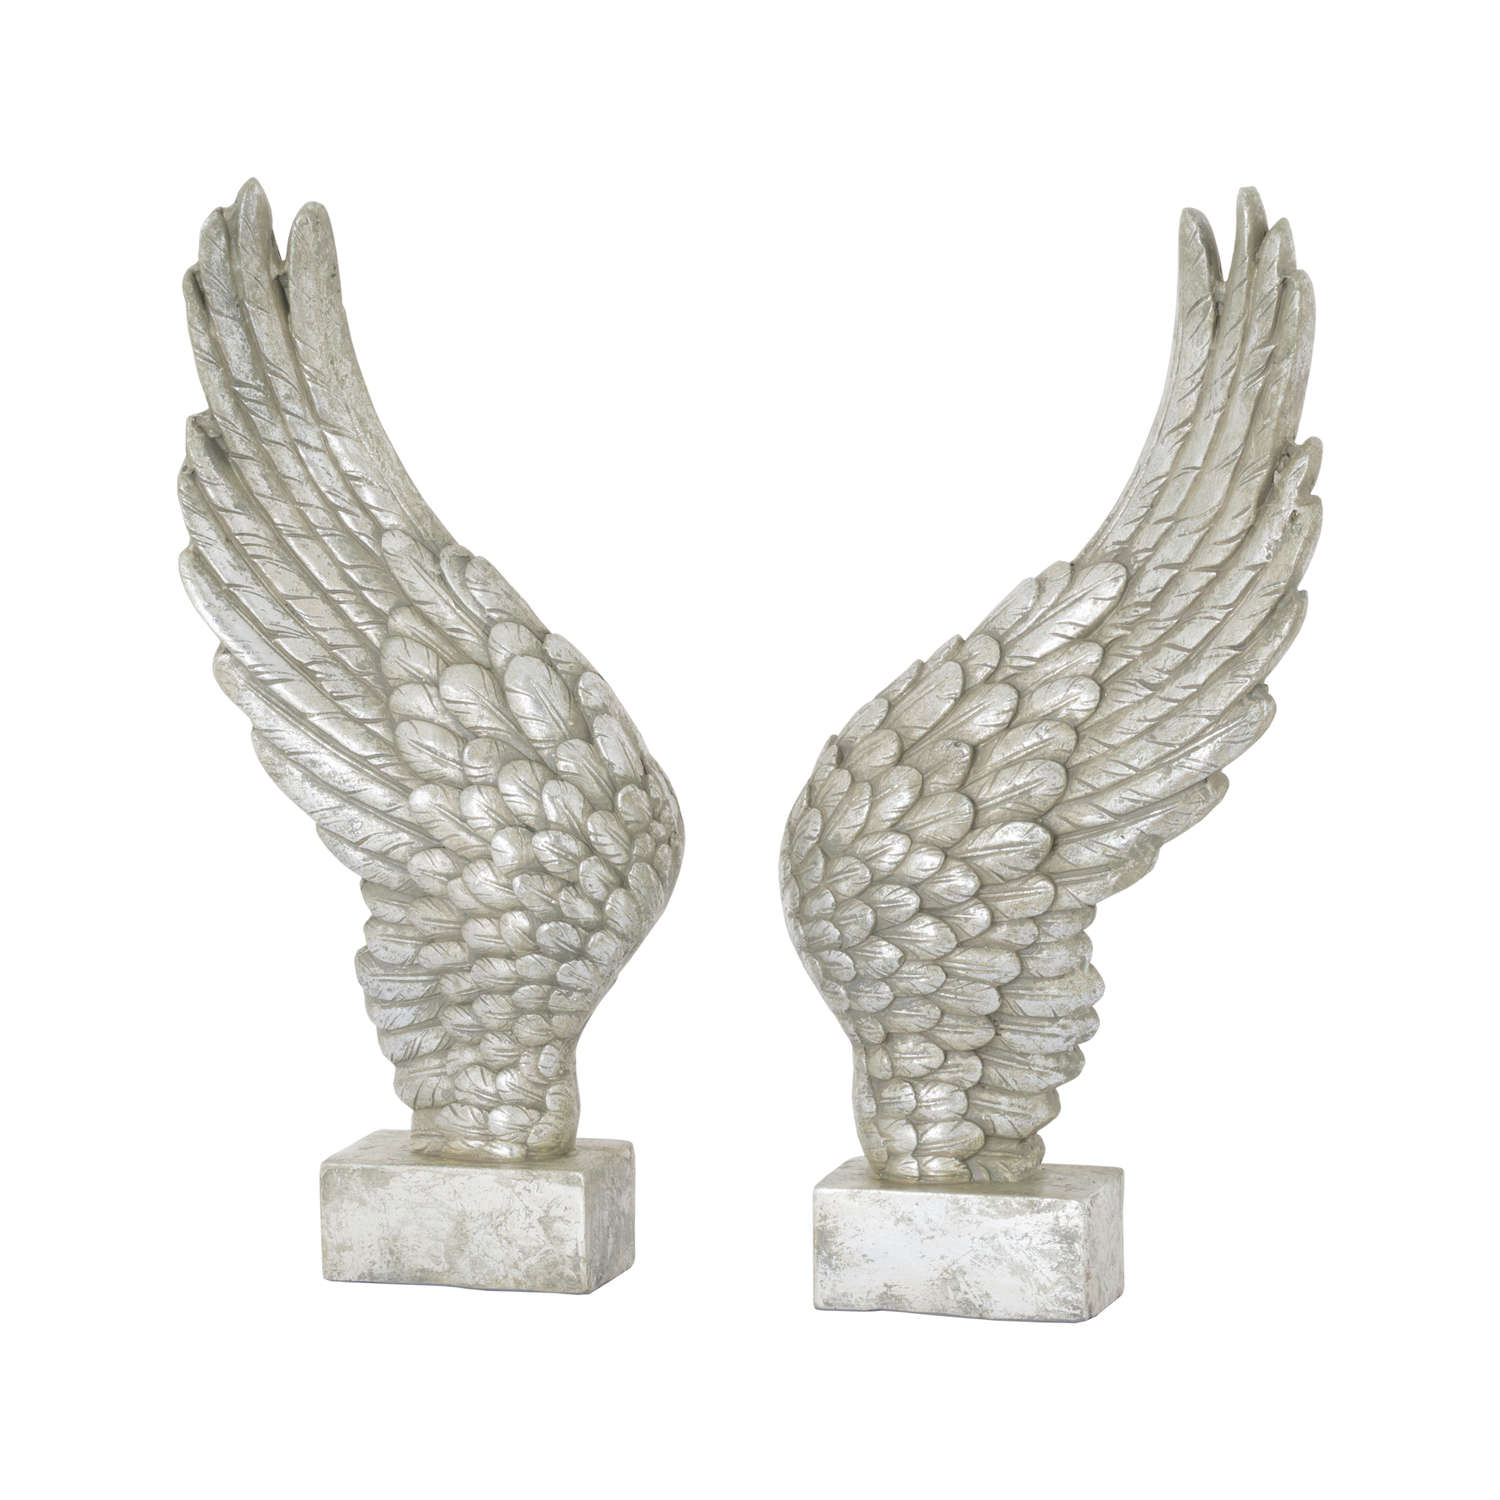 Large Freestanding Antique Silver Angel Wings Ornament - Image 1